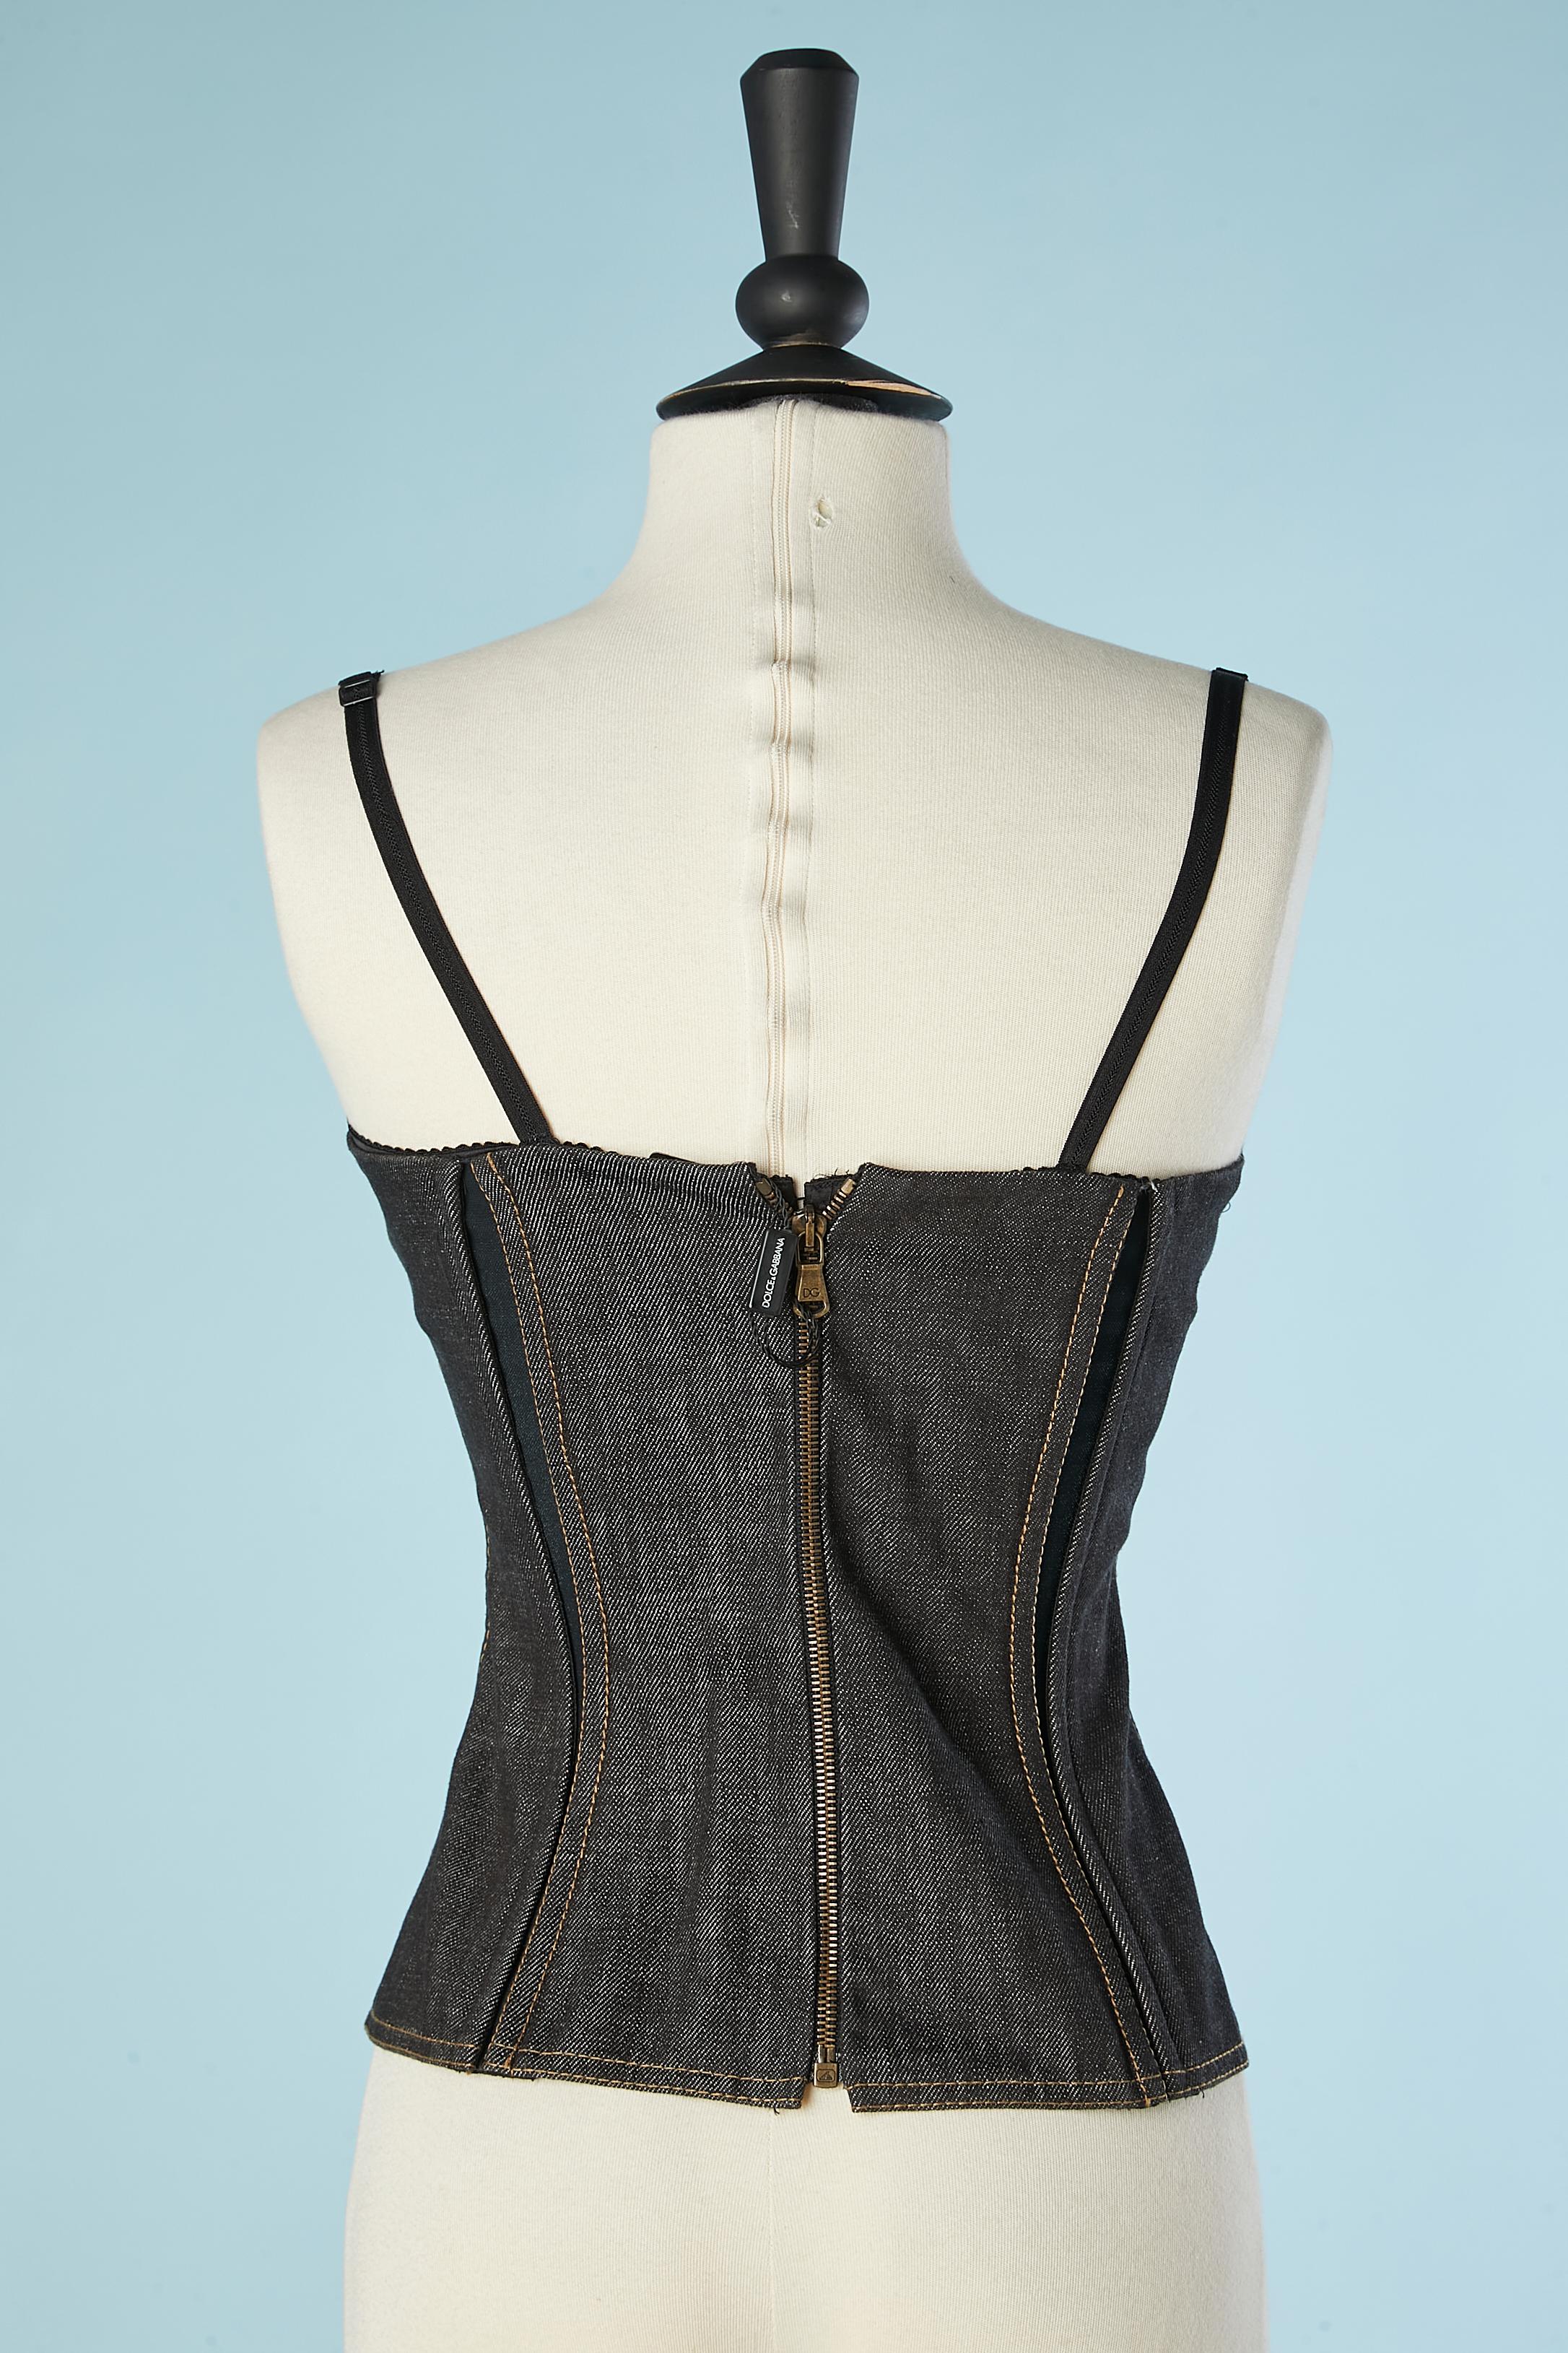 Denim bustier with leather lace and built-in bra Dolce & Gabbana NEW with tag 2